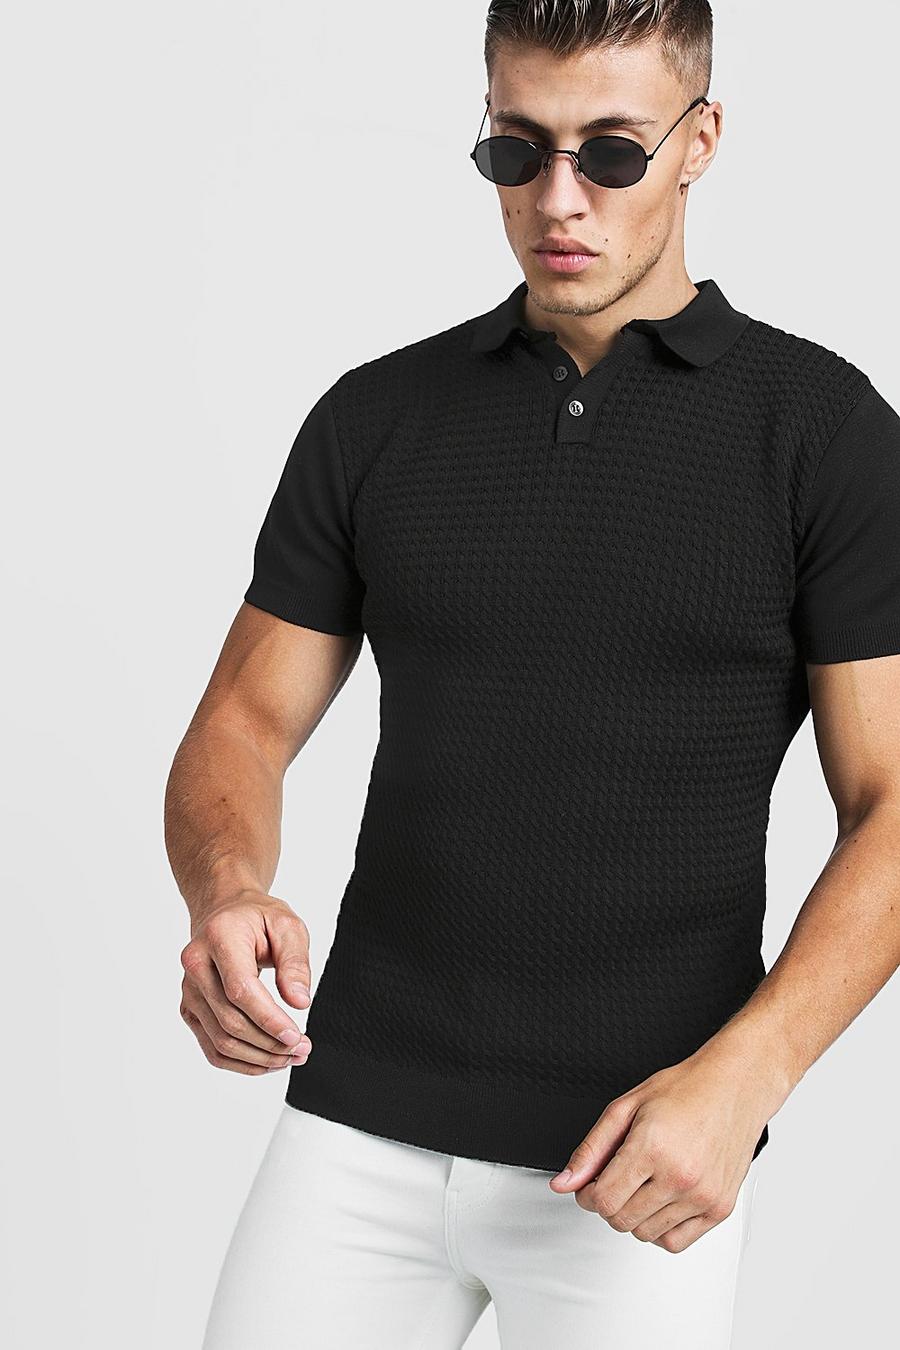 Muscle-Fit Poloshirt mit Zopfmuster, Schwarz image number 1